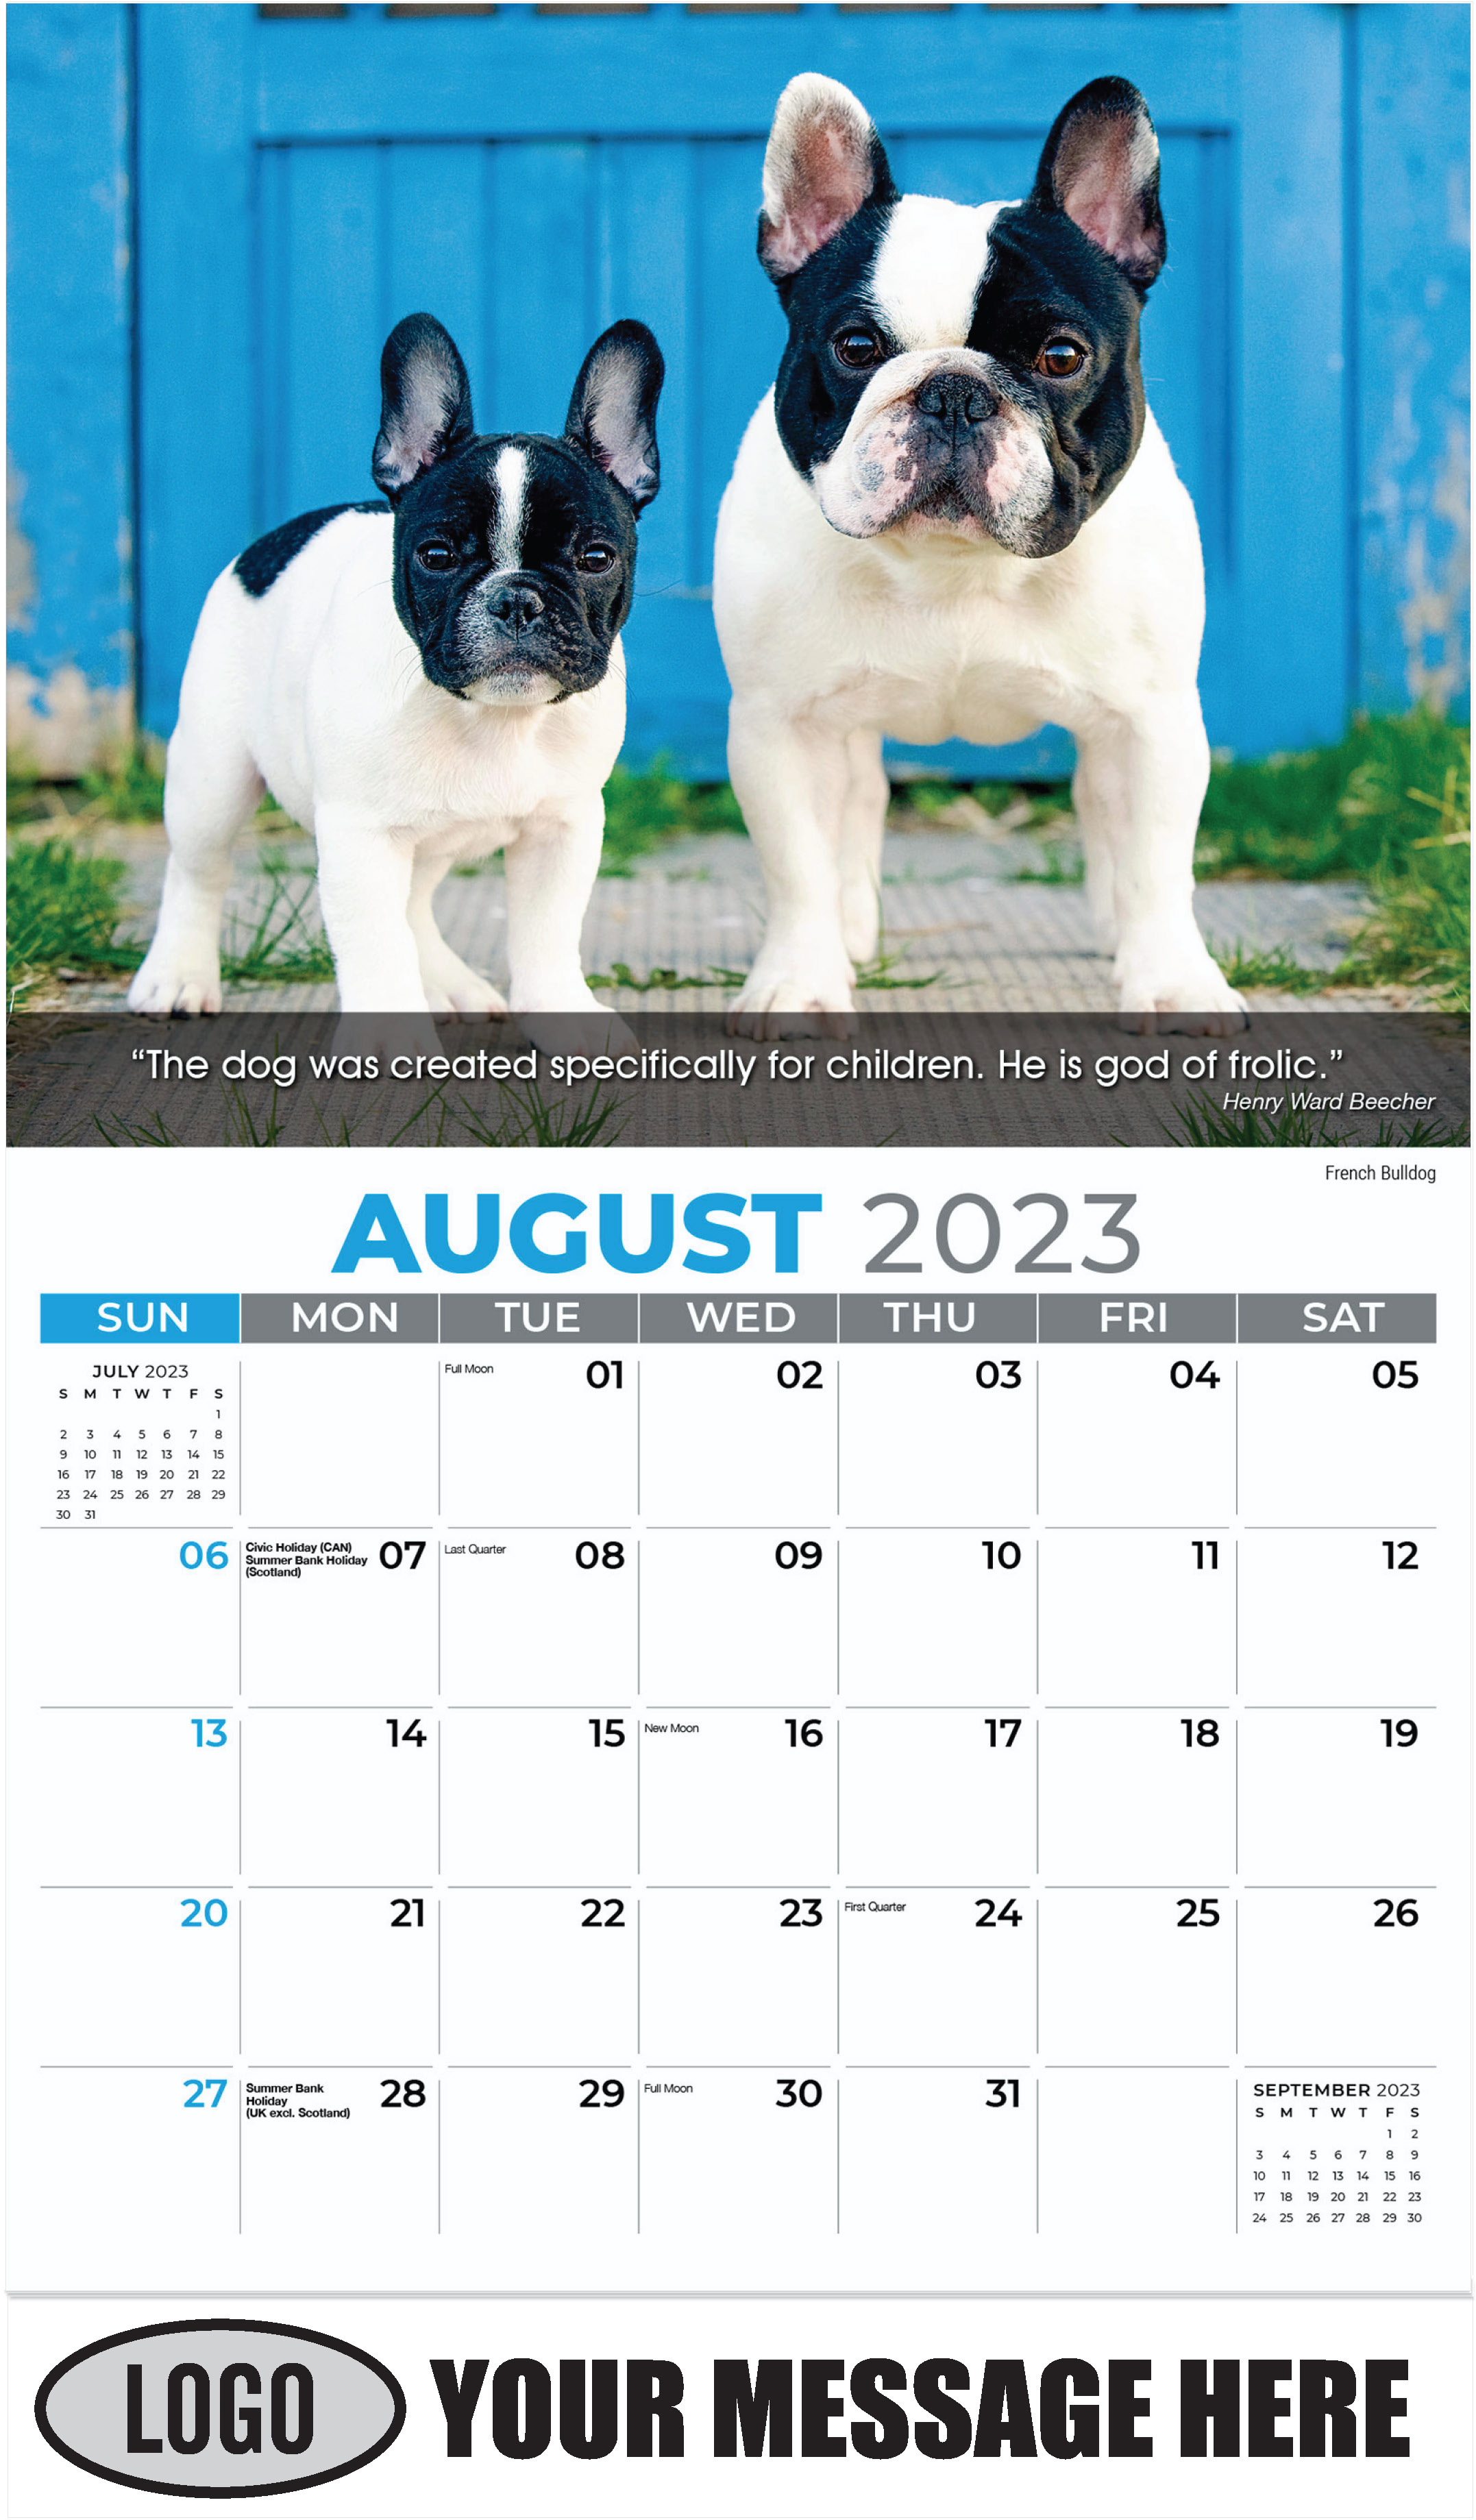 French Bulldog & Pup - August - Dogs, ''Man's Best Friends'' 2023 Promotional Calendar